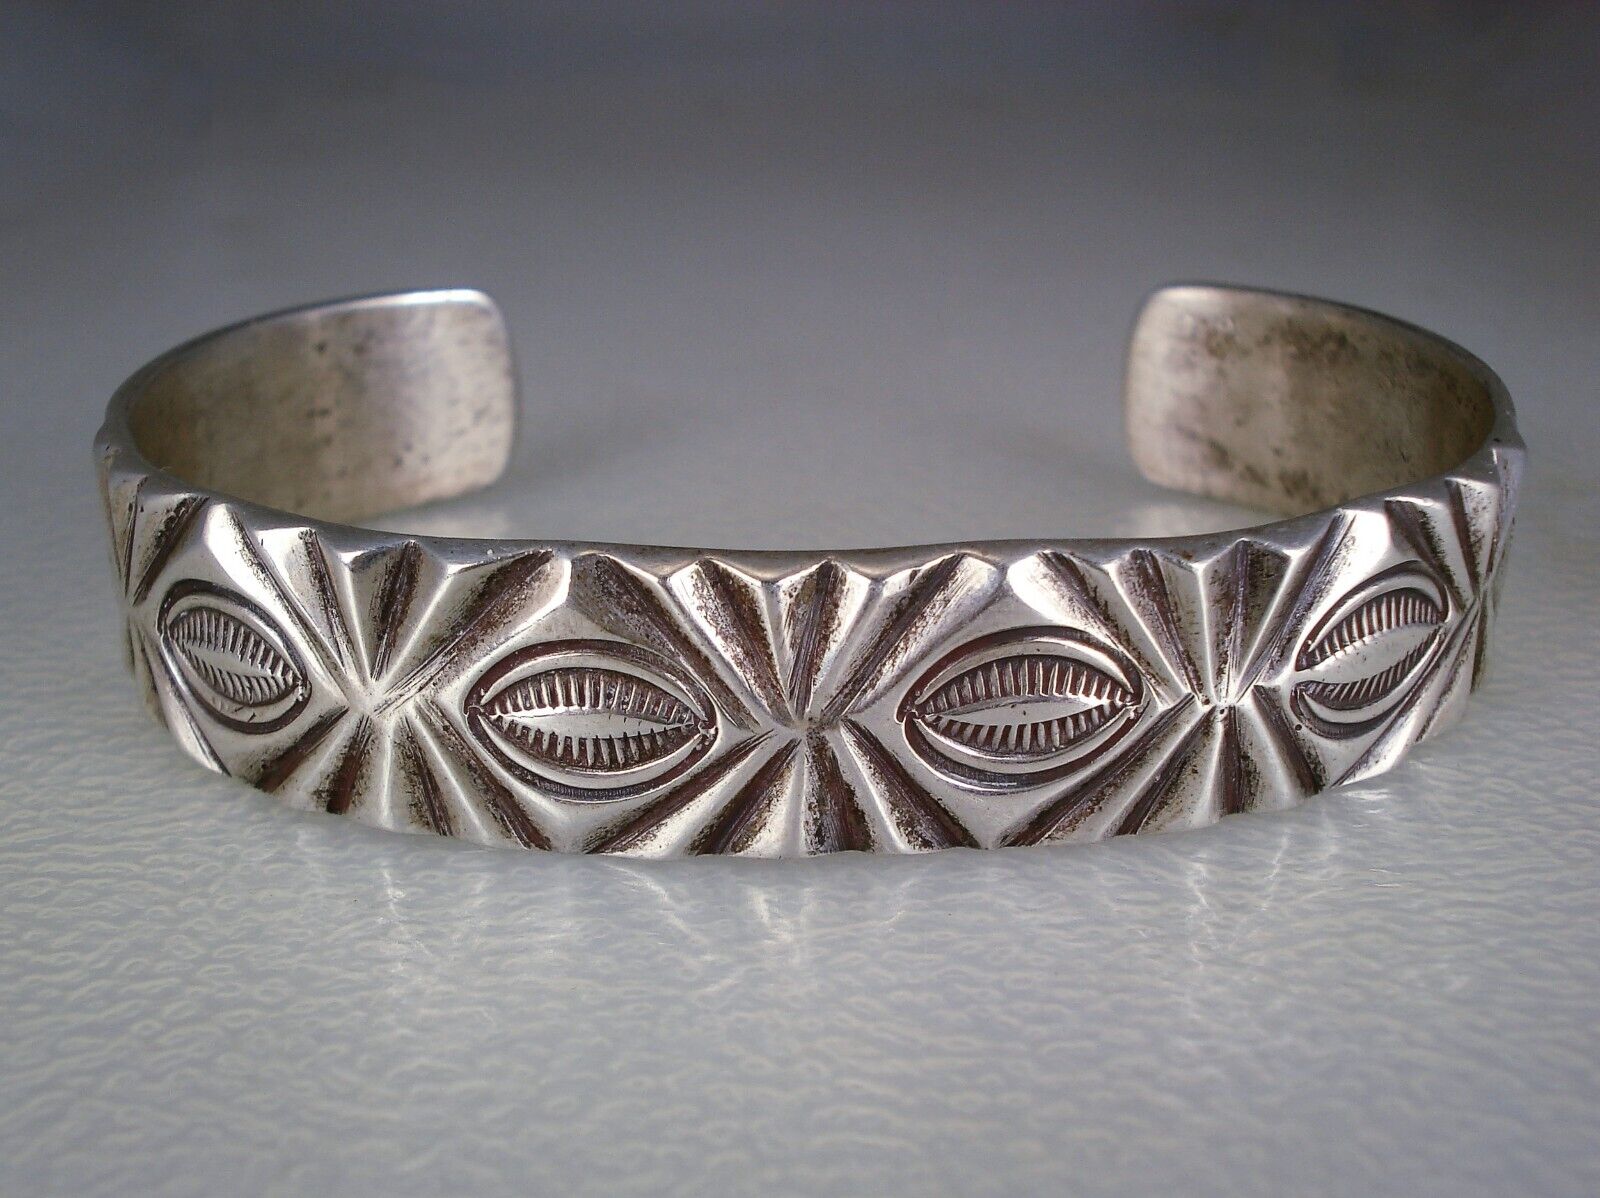 EXTRAORDINARY OLD NAVAJO HAND FILED & STAMPED STERLING SILVER BRACELET